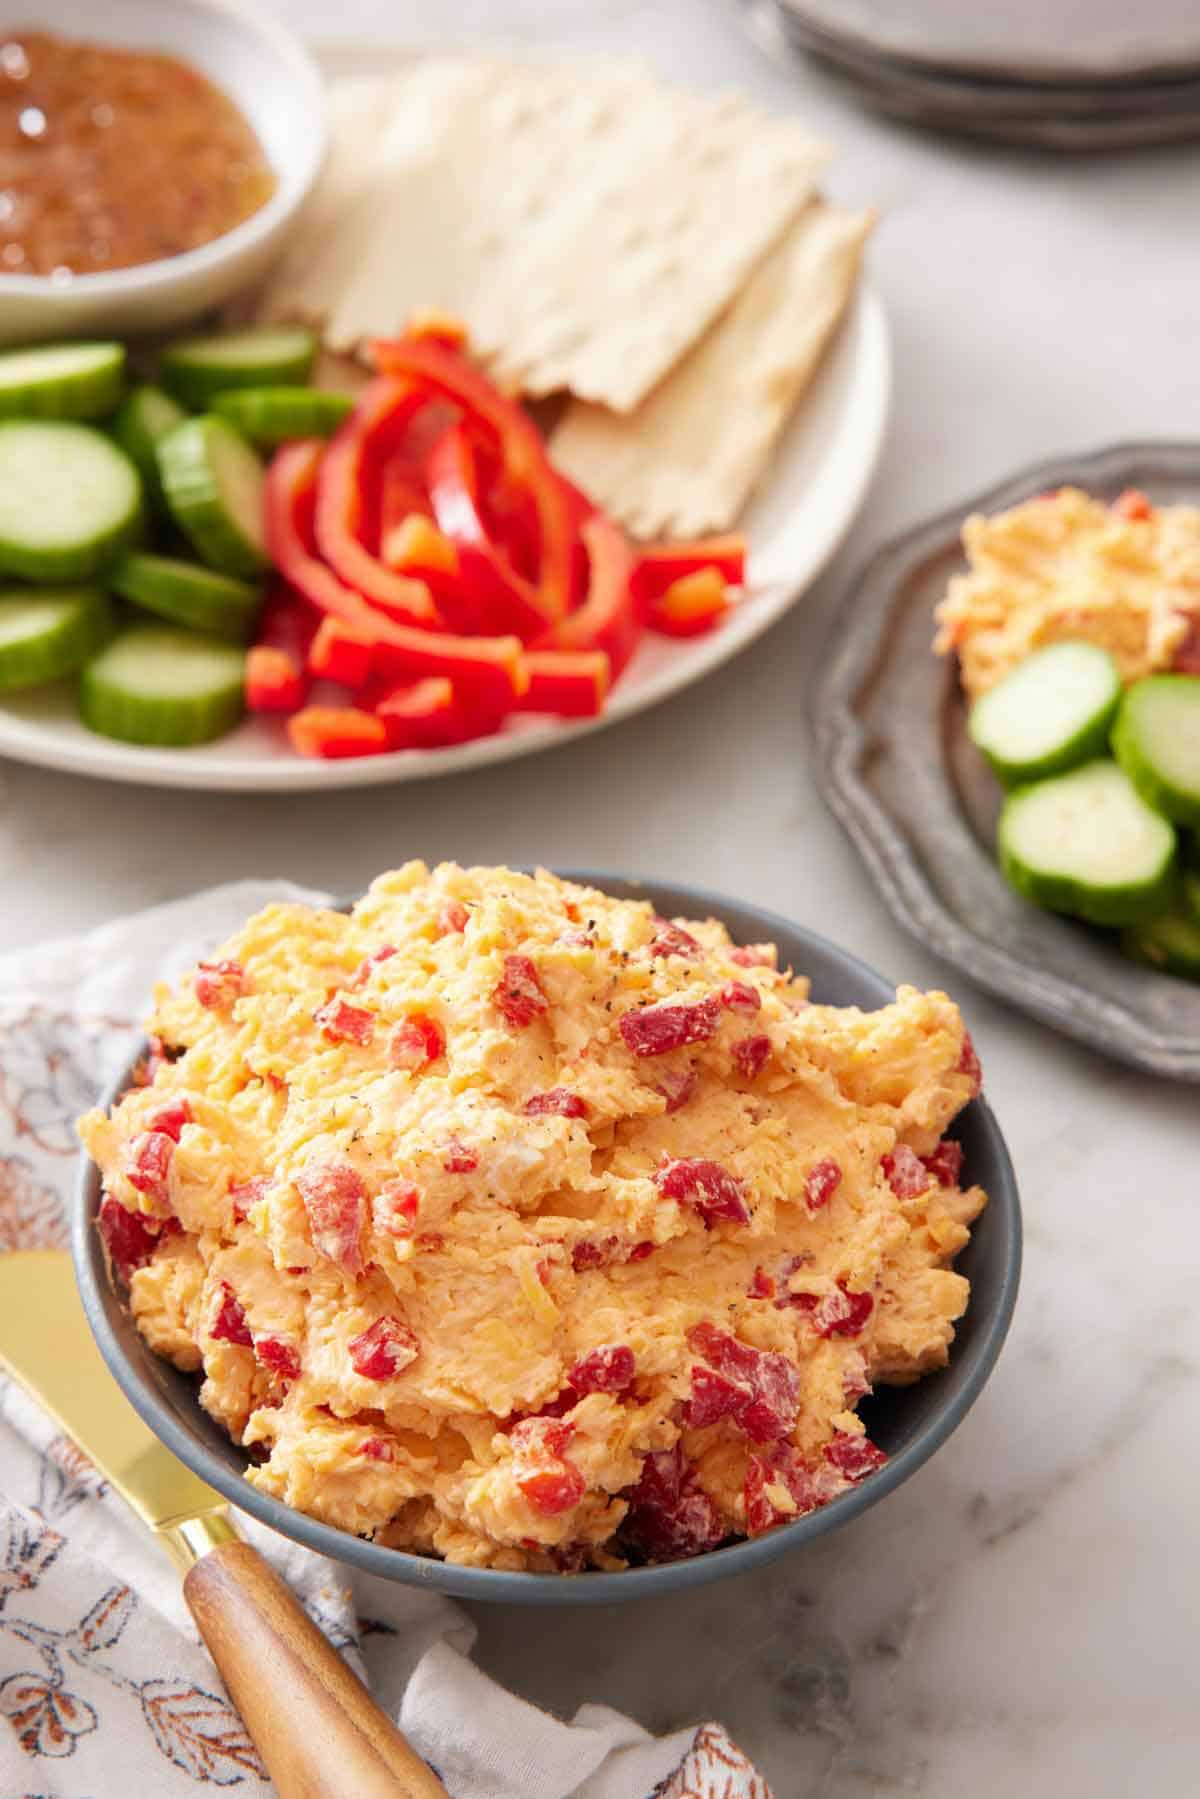 A bowl of pimento cheese with some crackers, peppers, and cucumbers in the background for dipping.